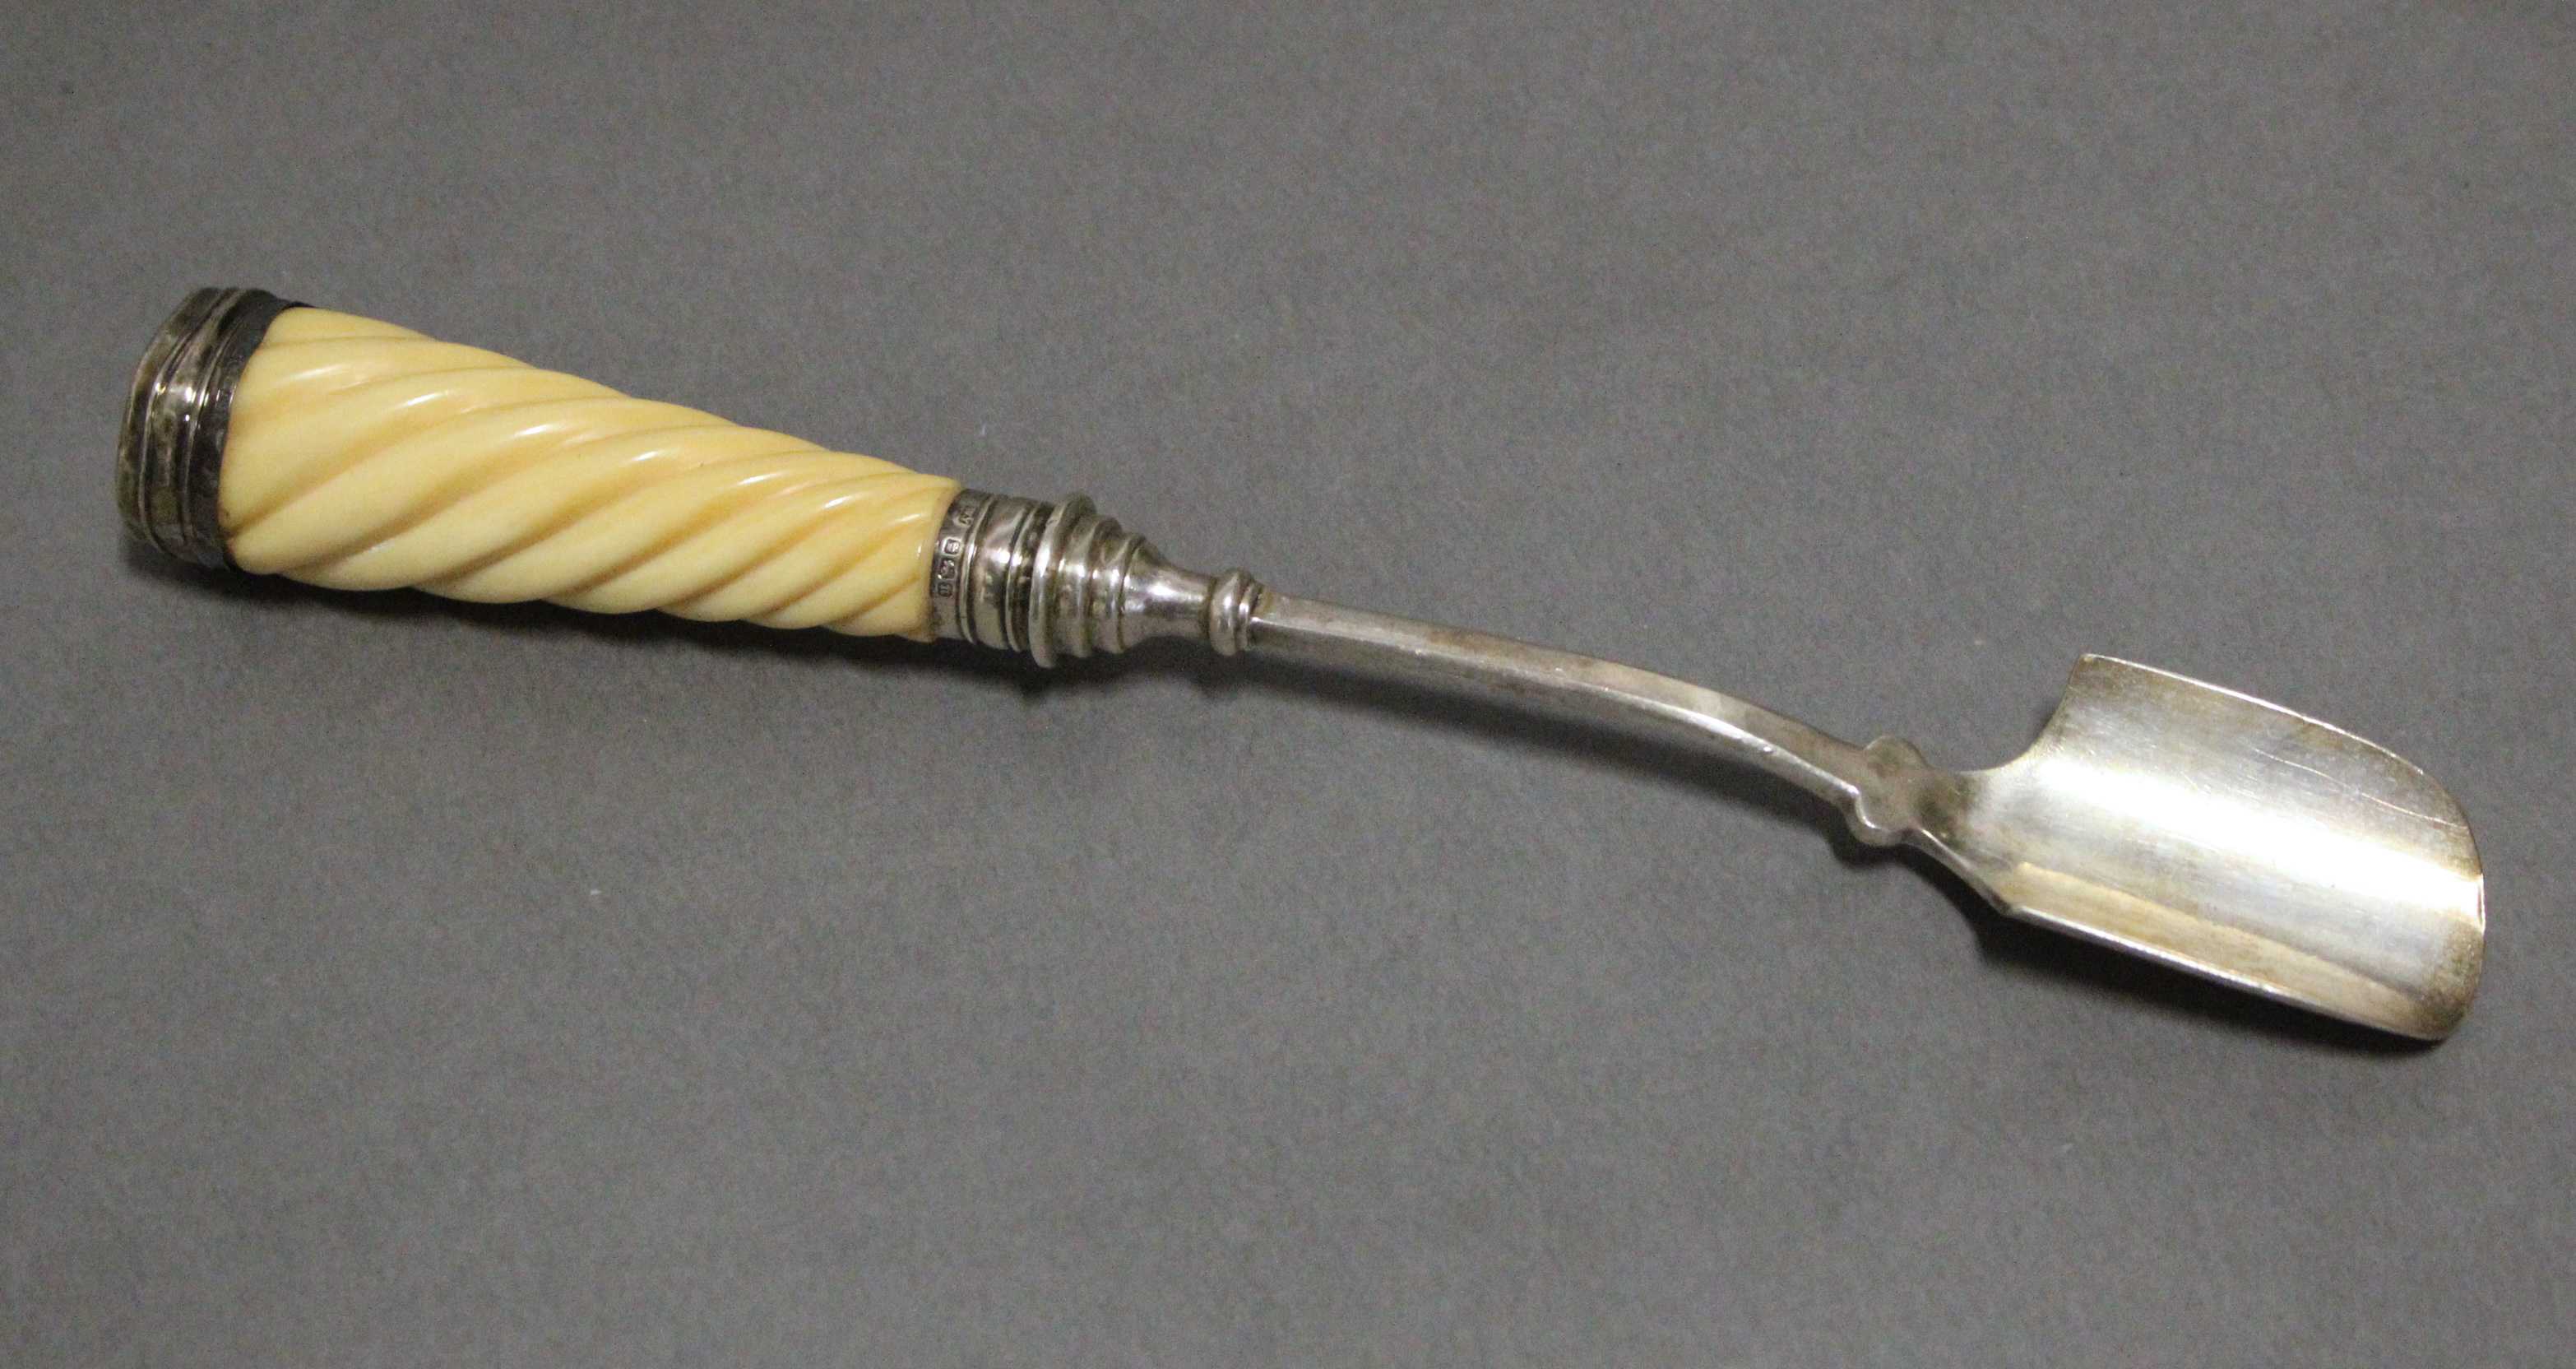 An Edwardian silver cheese scoop with spiral-fluted ivory handle, 9¼” long; London 1906 b Goldsmiths